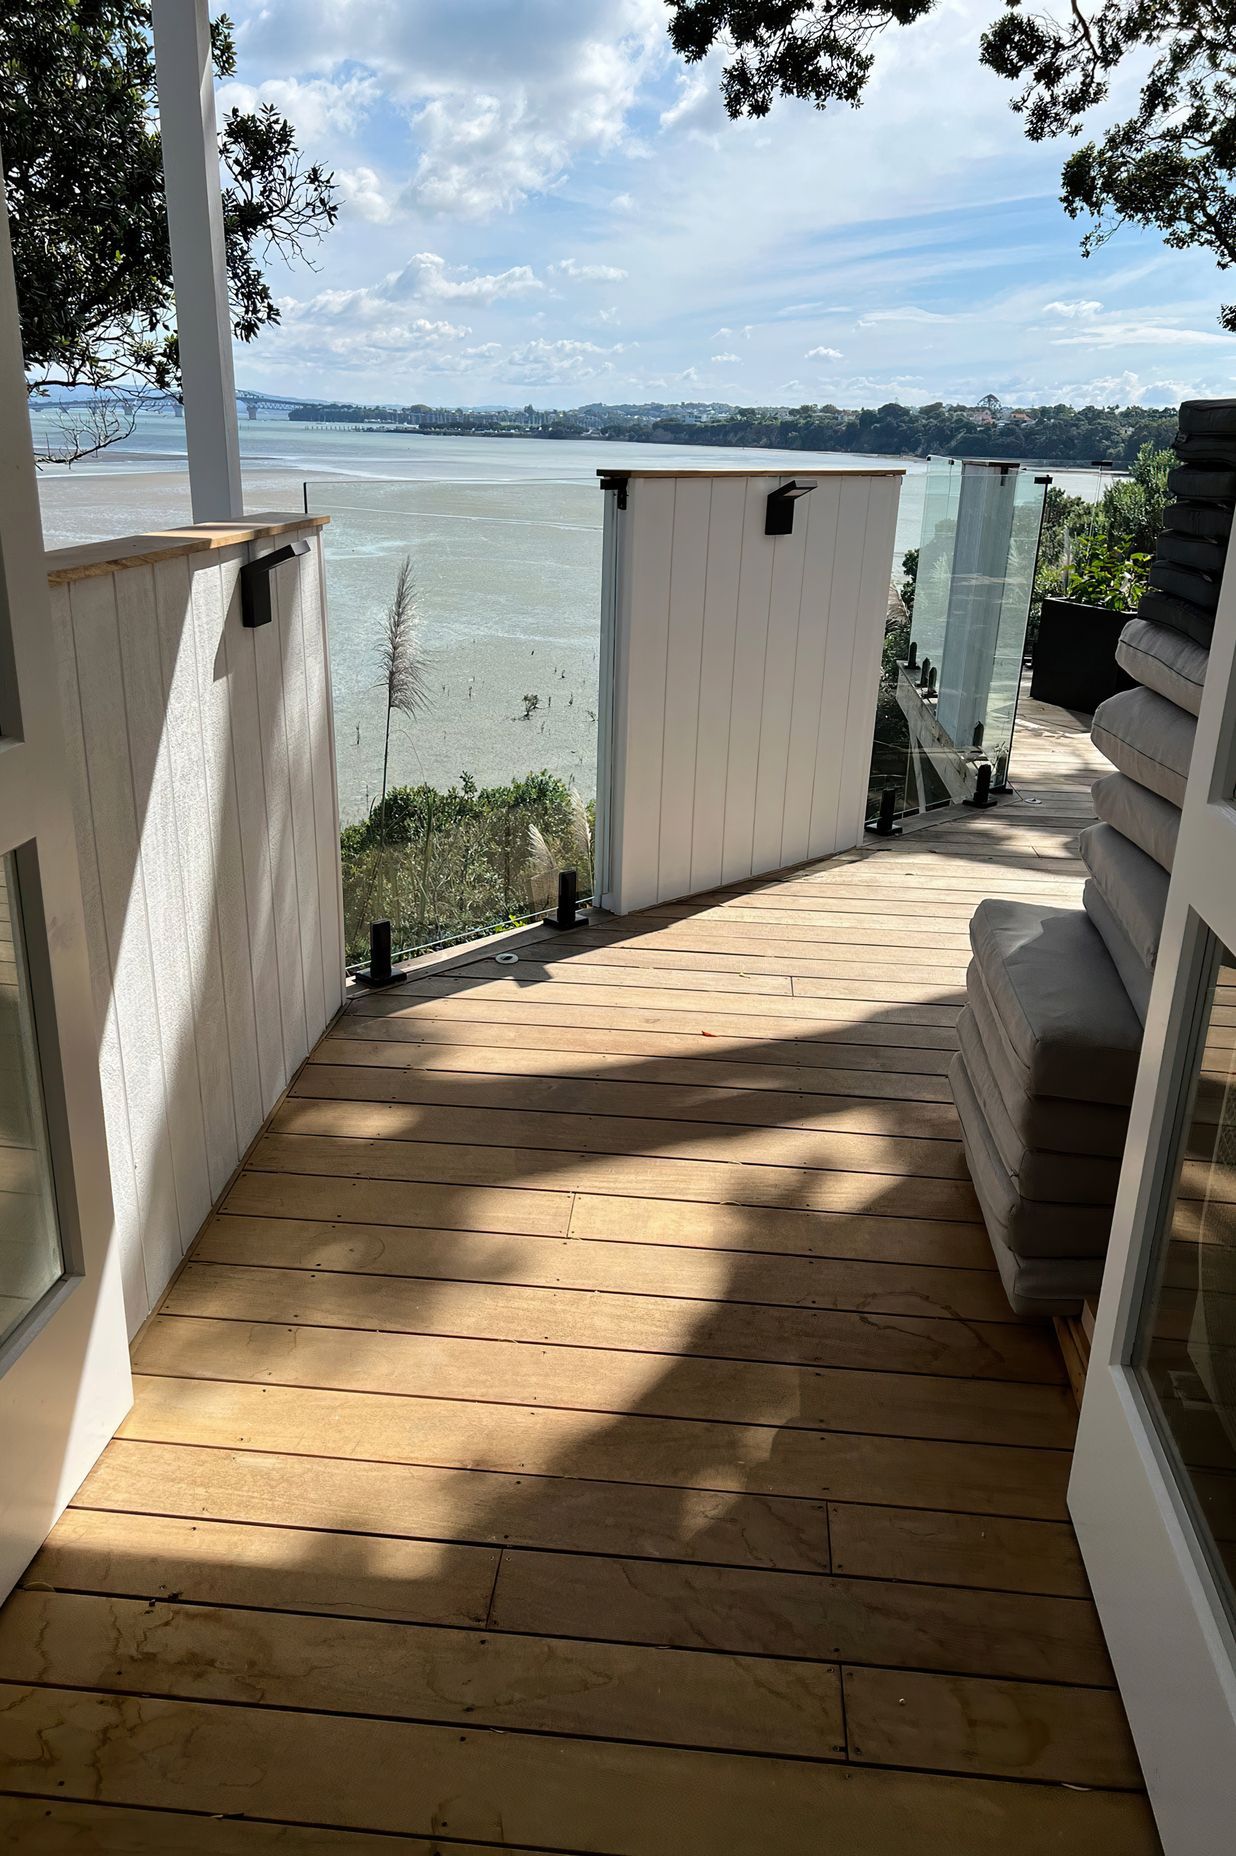 Wooden deck with a mixture of white painted wood and glass barriers overlooking the sea